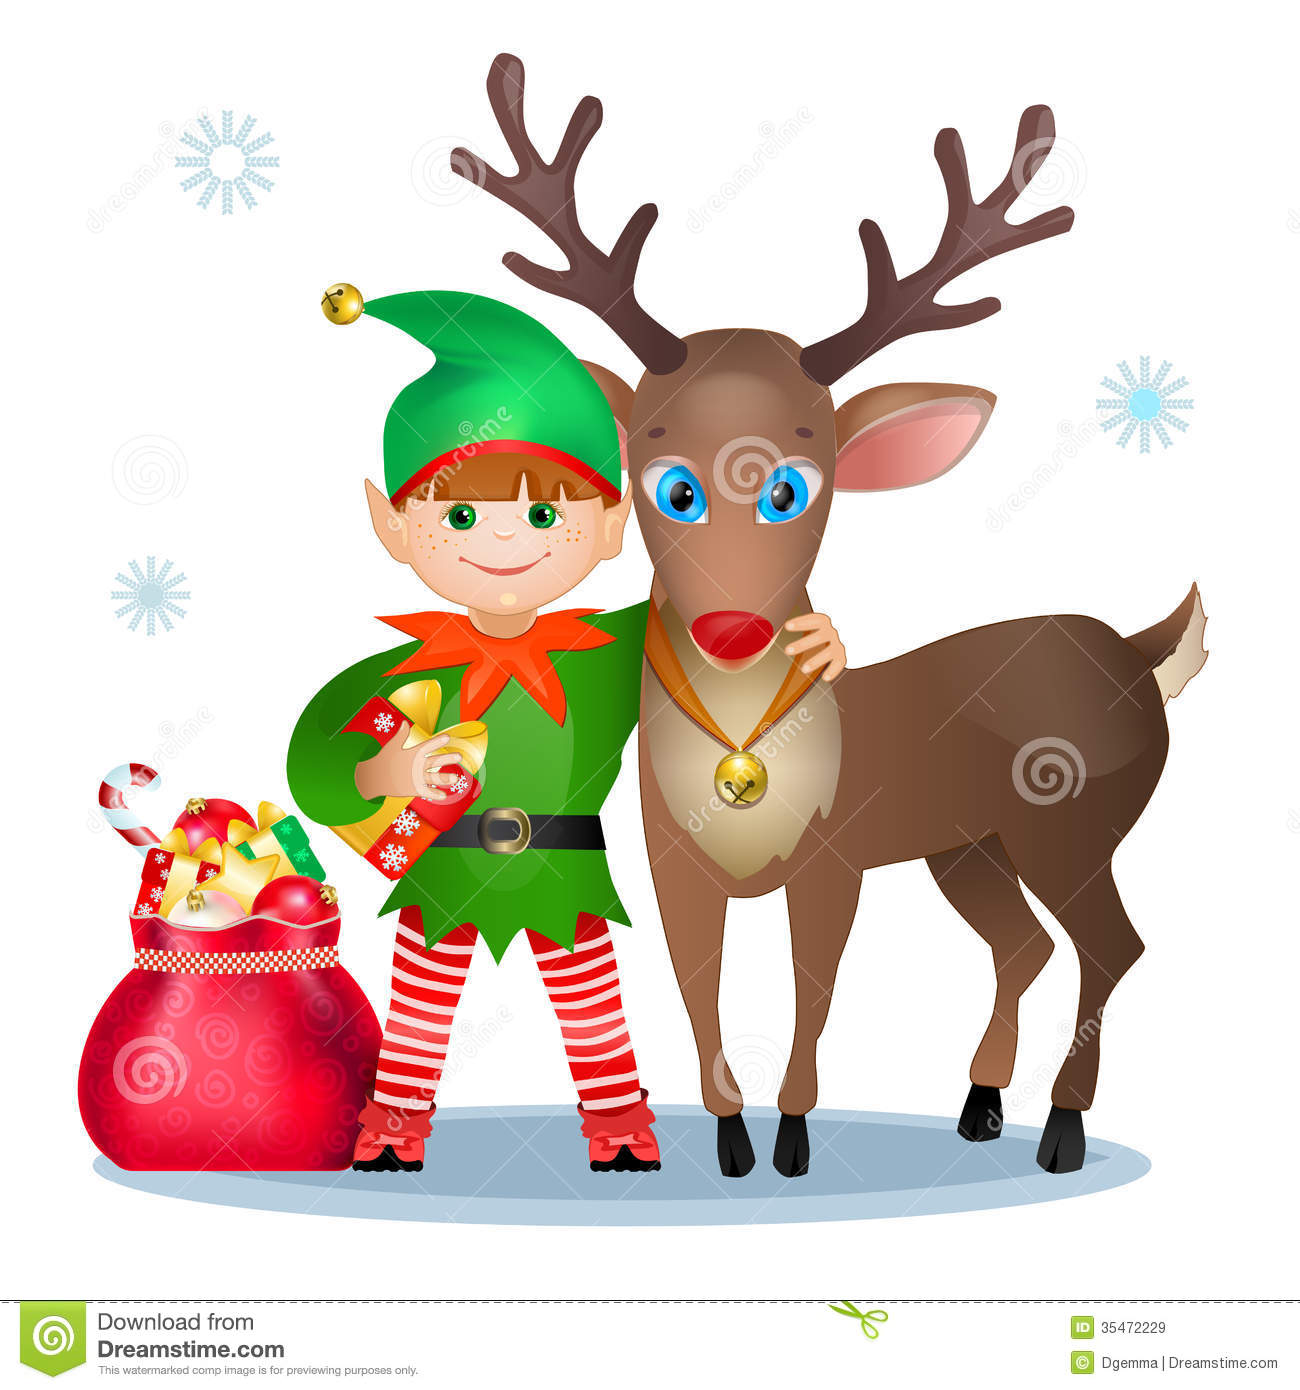 Royalty Free Stock Images  Funny Elf And Reindeer